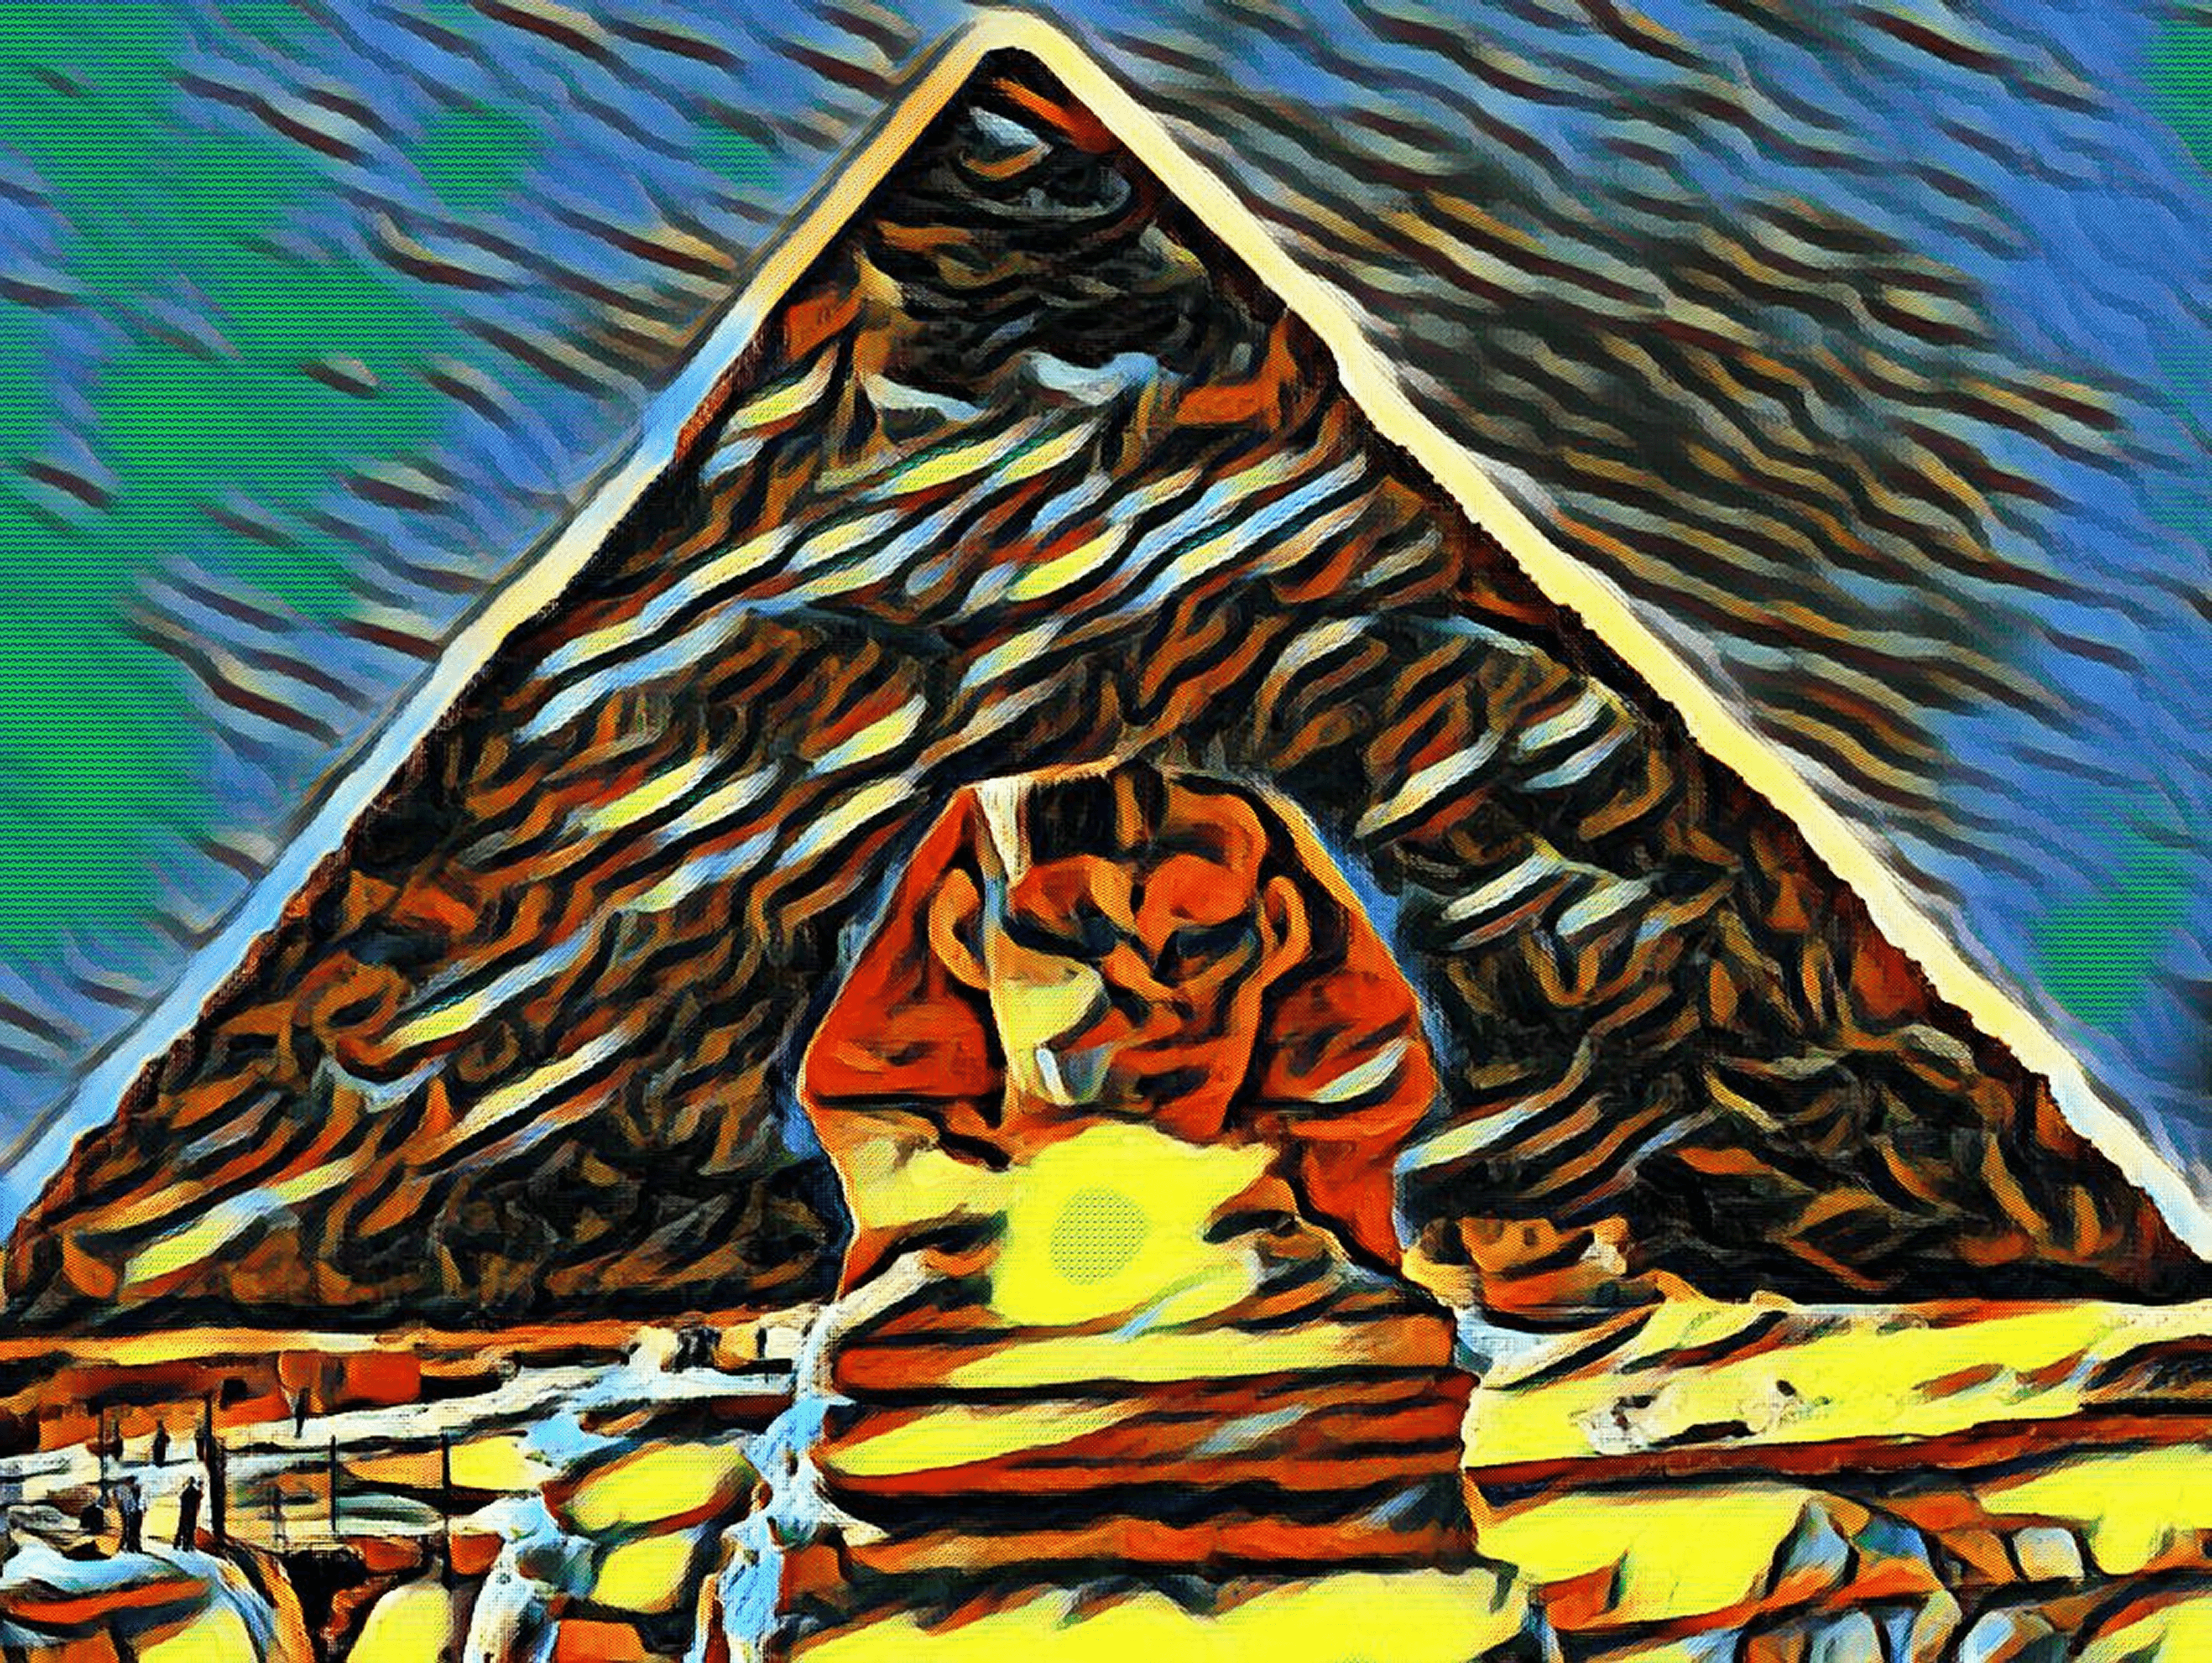 Great Pyramid Egypt NFT Pop Art NFT by SOLLOG Limited Minting 10 Copies on Polygon Opensea